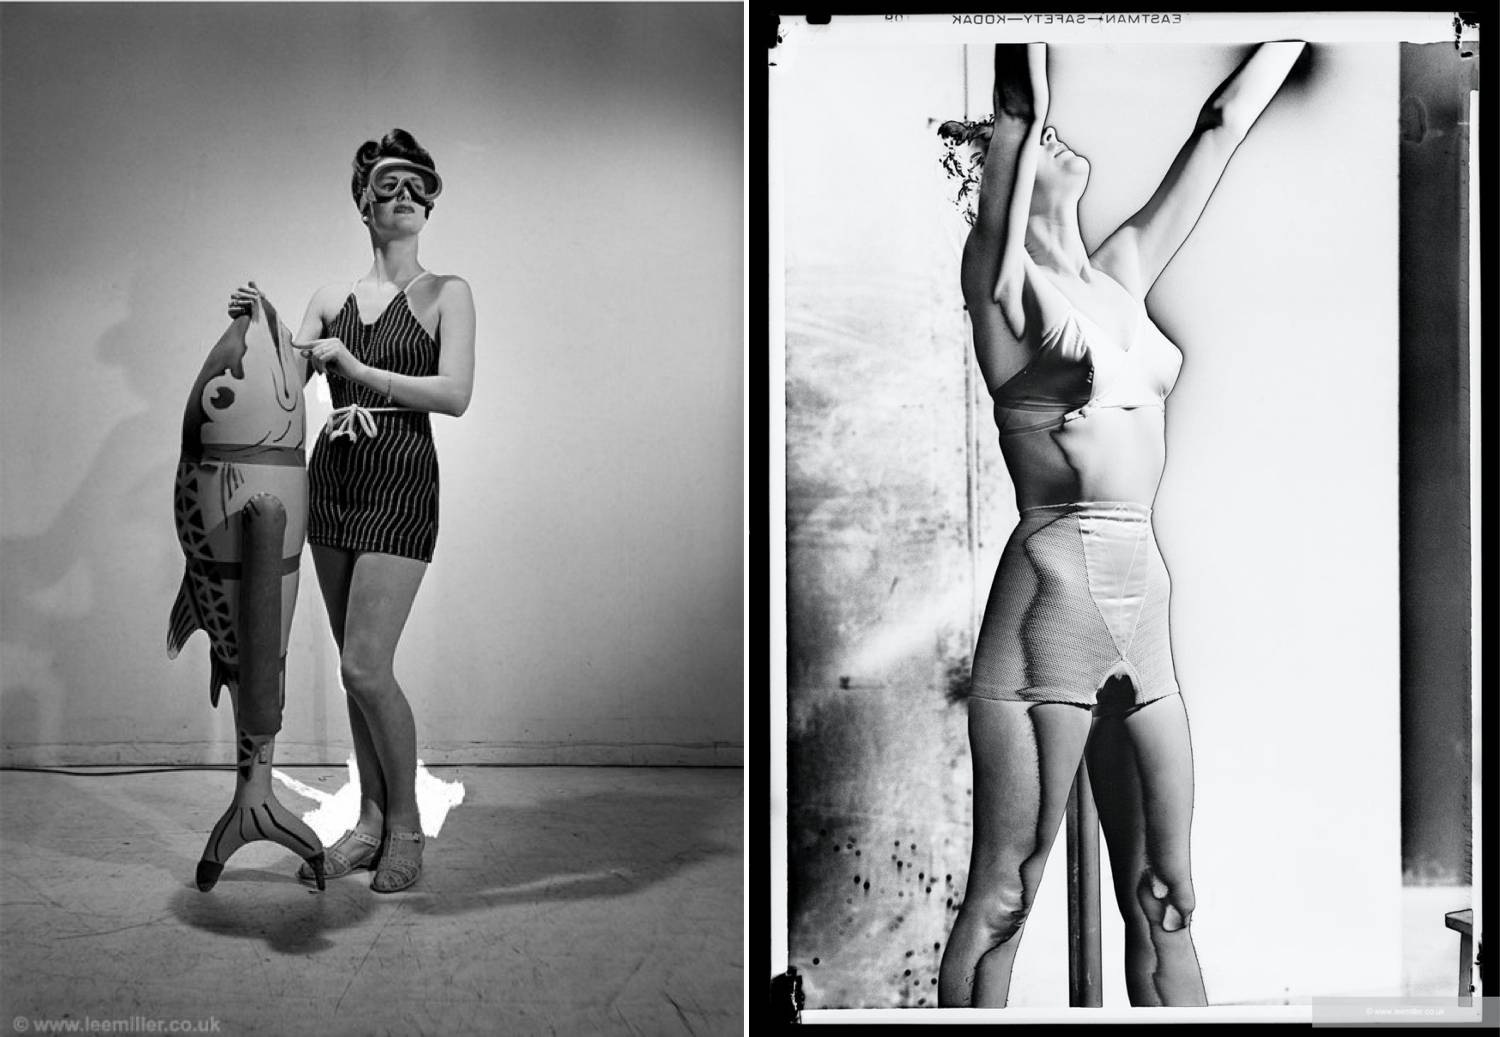 A series of two photographs by Lee Miller